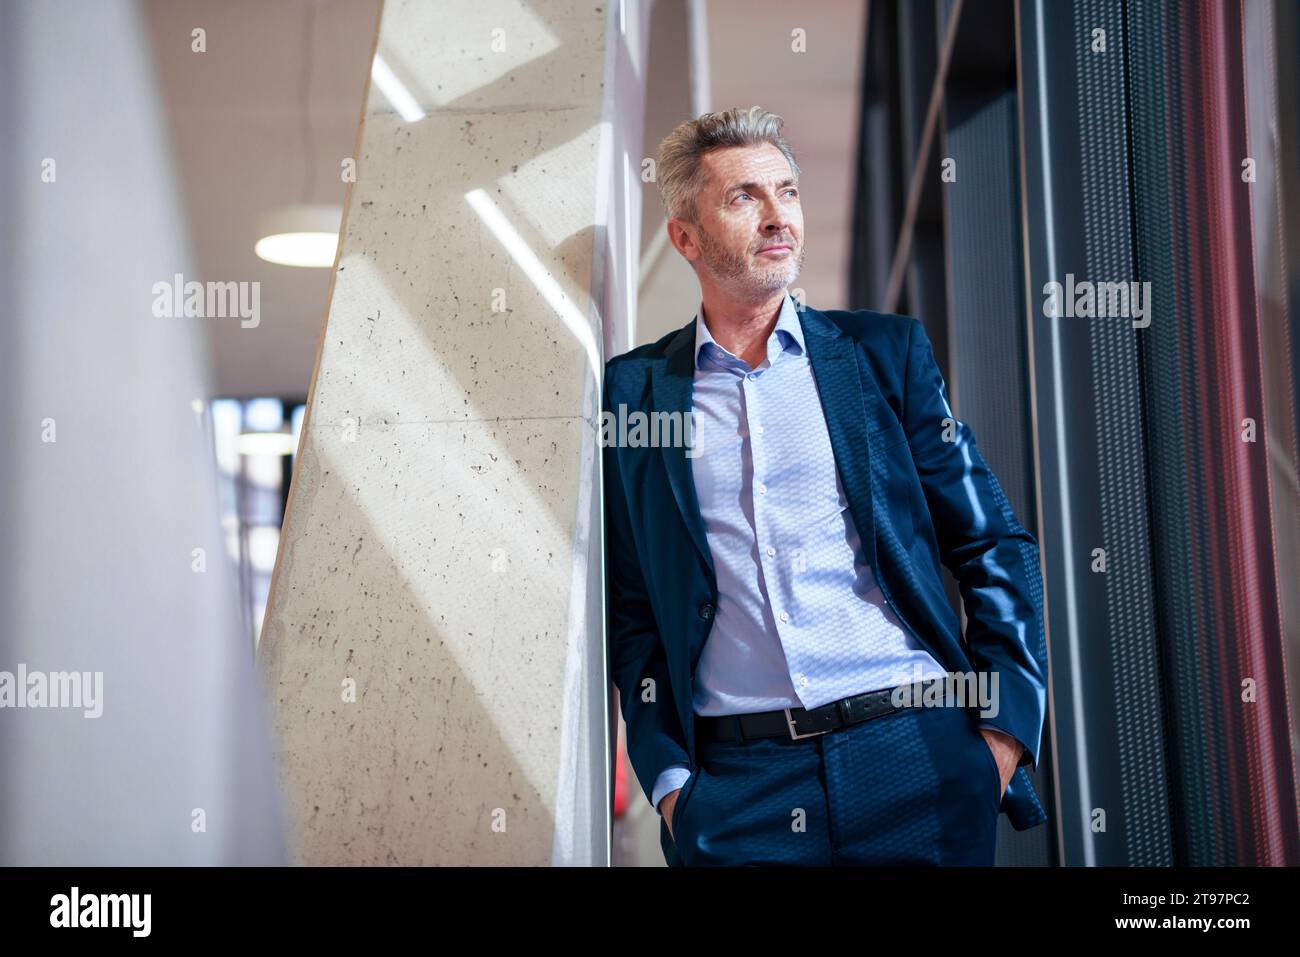 Thoughtful businessman with hands in pockets standing near column Stock Photo